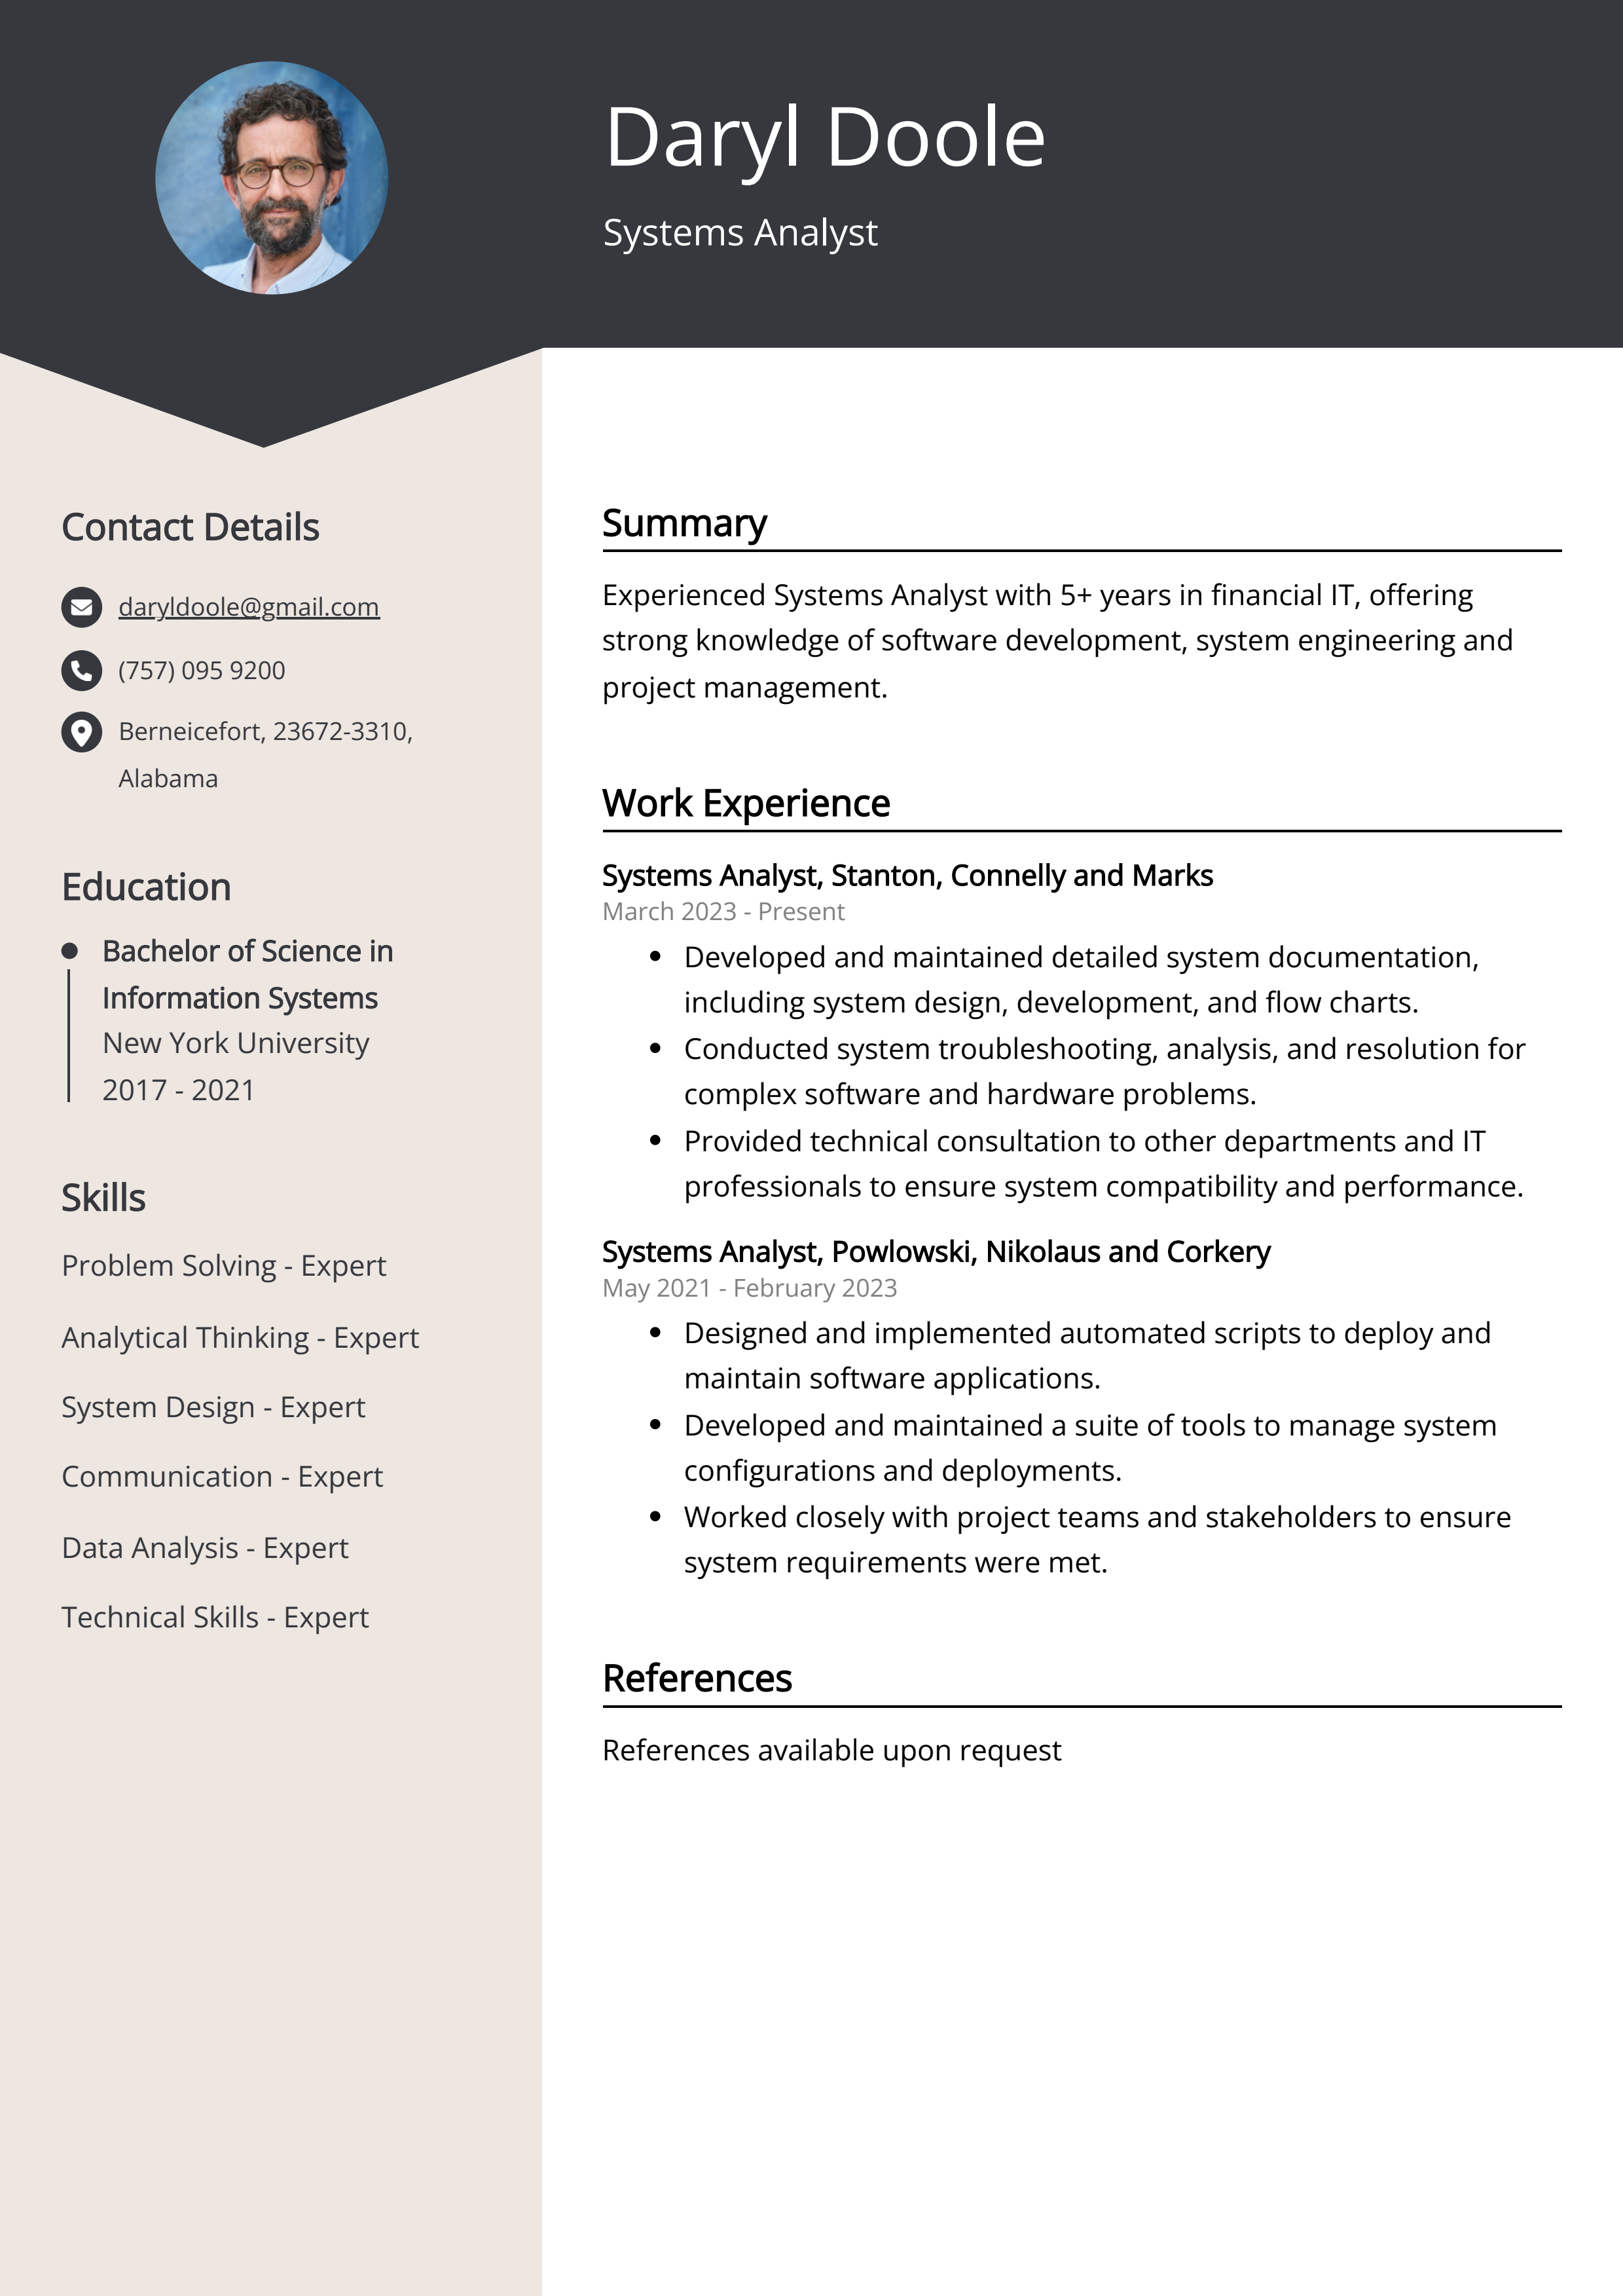 Systems Analyst CV Example